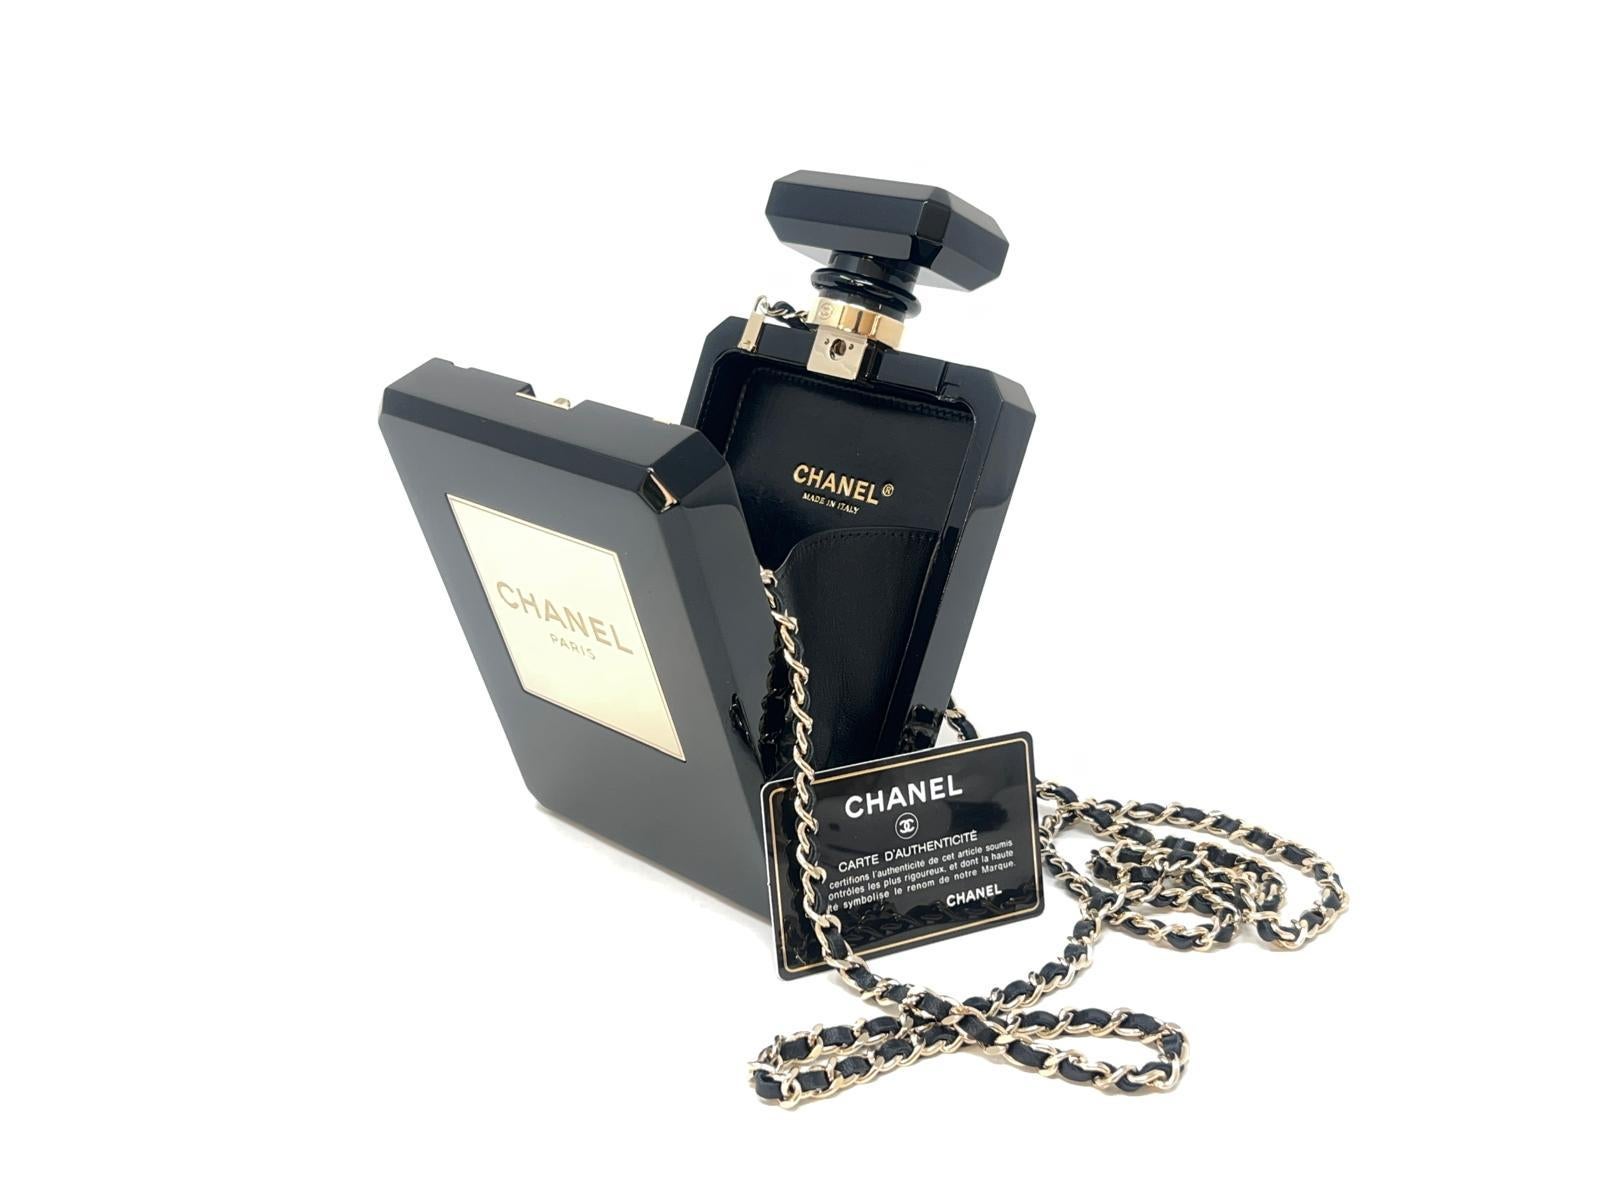 Chanel N5 Black Perfume Bottle Minaudière Cruise Collection 2013  For Sale 1